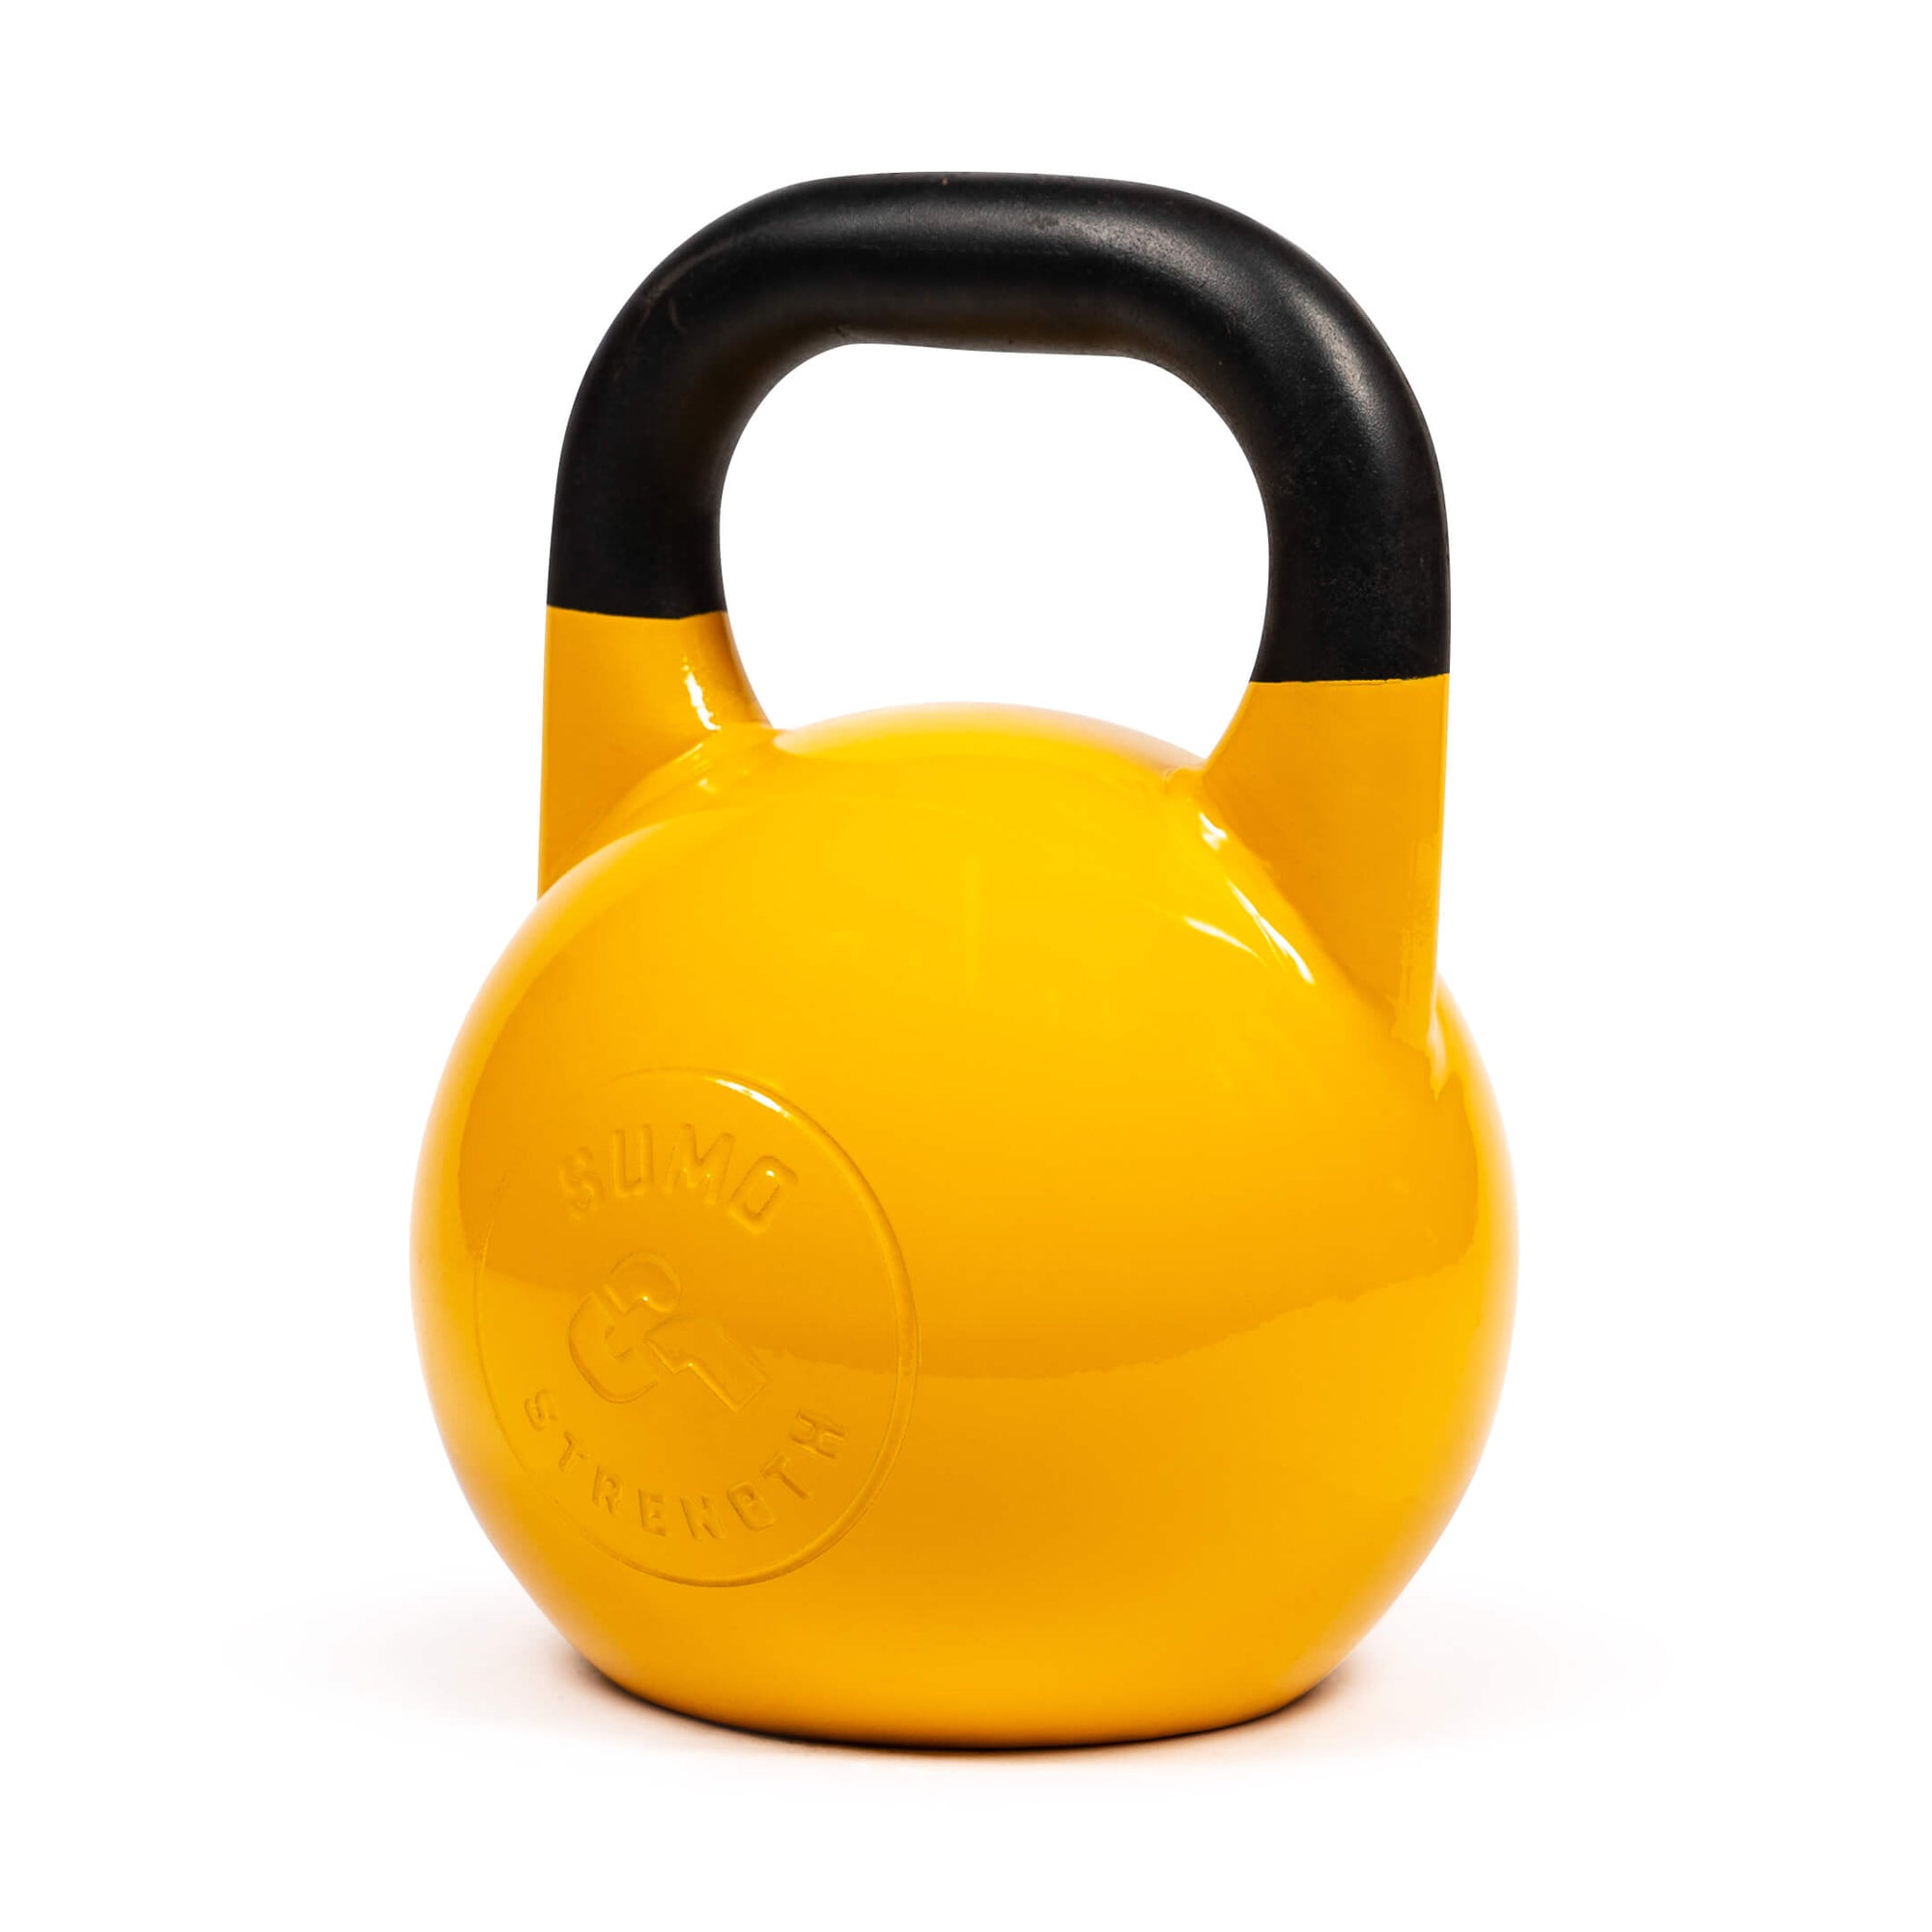 ZIVA Performance Competition Kettlebell, 44% OFF